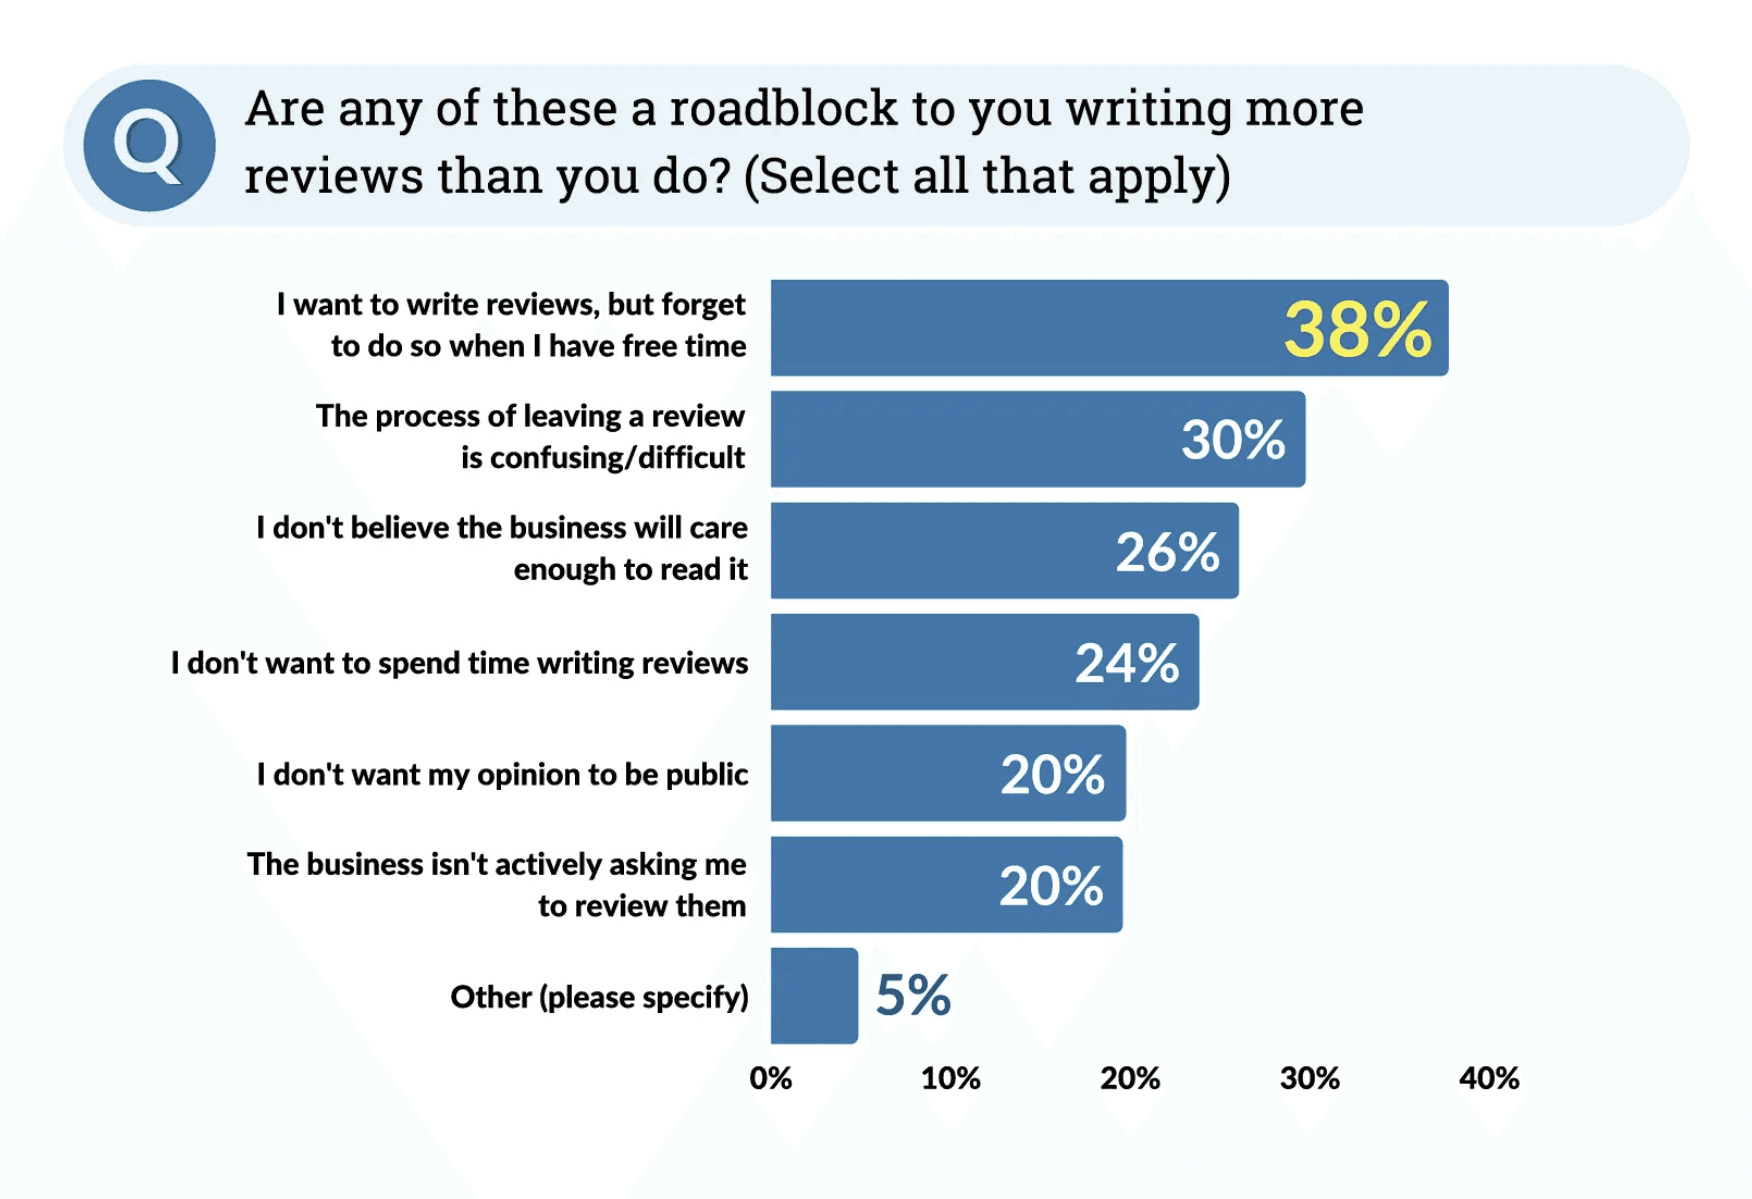 infographic showing that the #1 reason people don't write reviews is that they simply forget to when they have free time